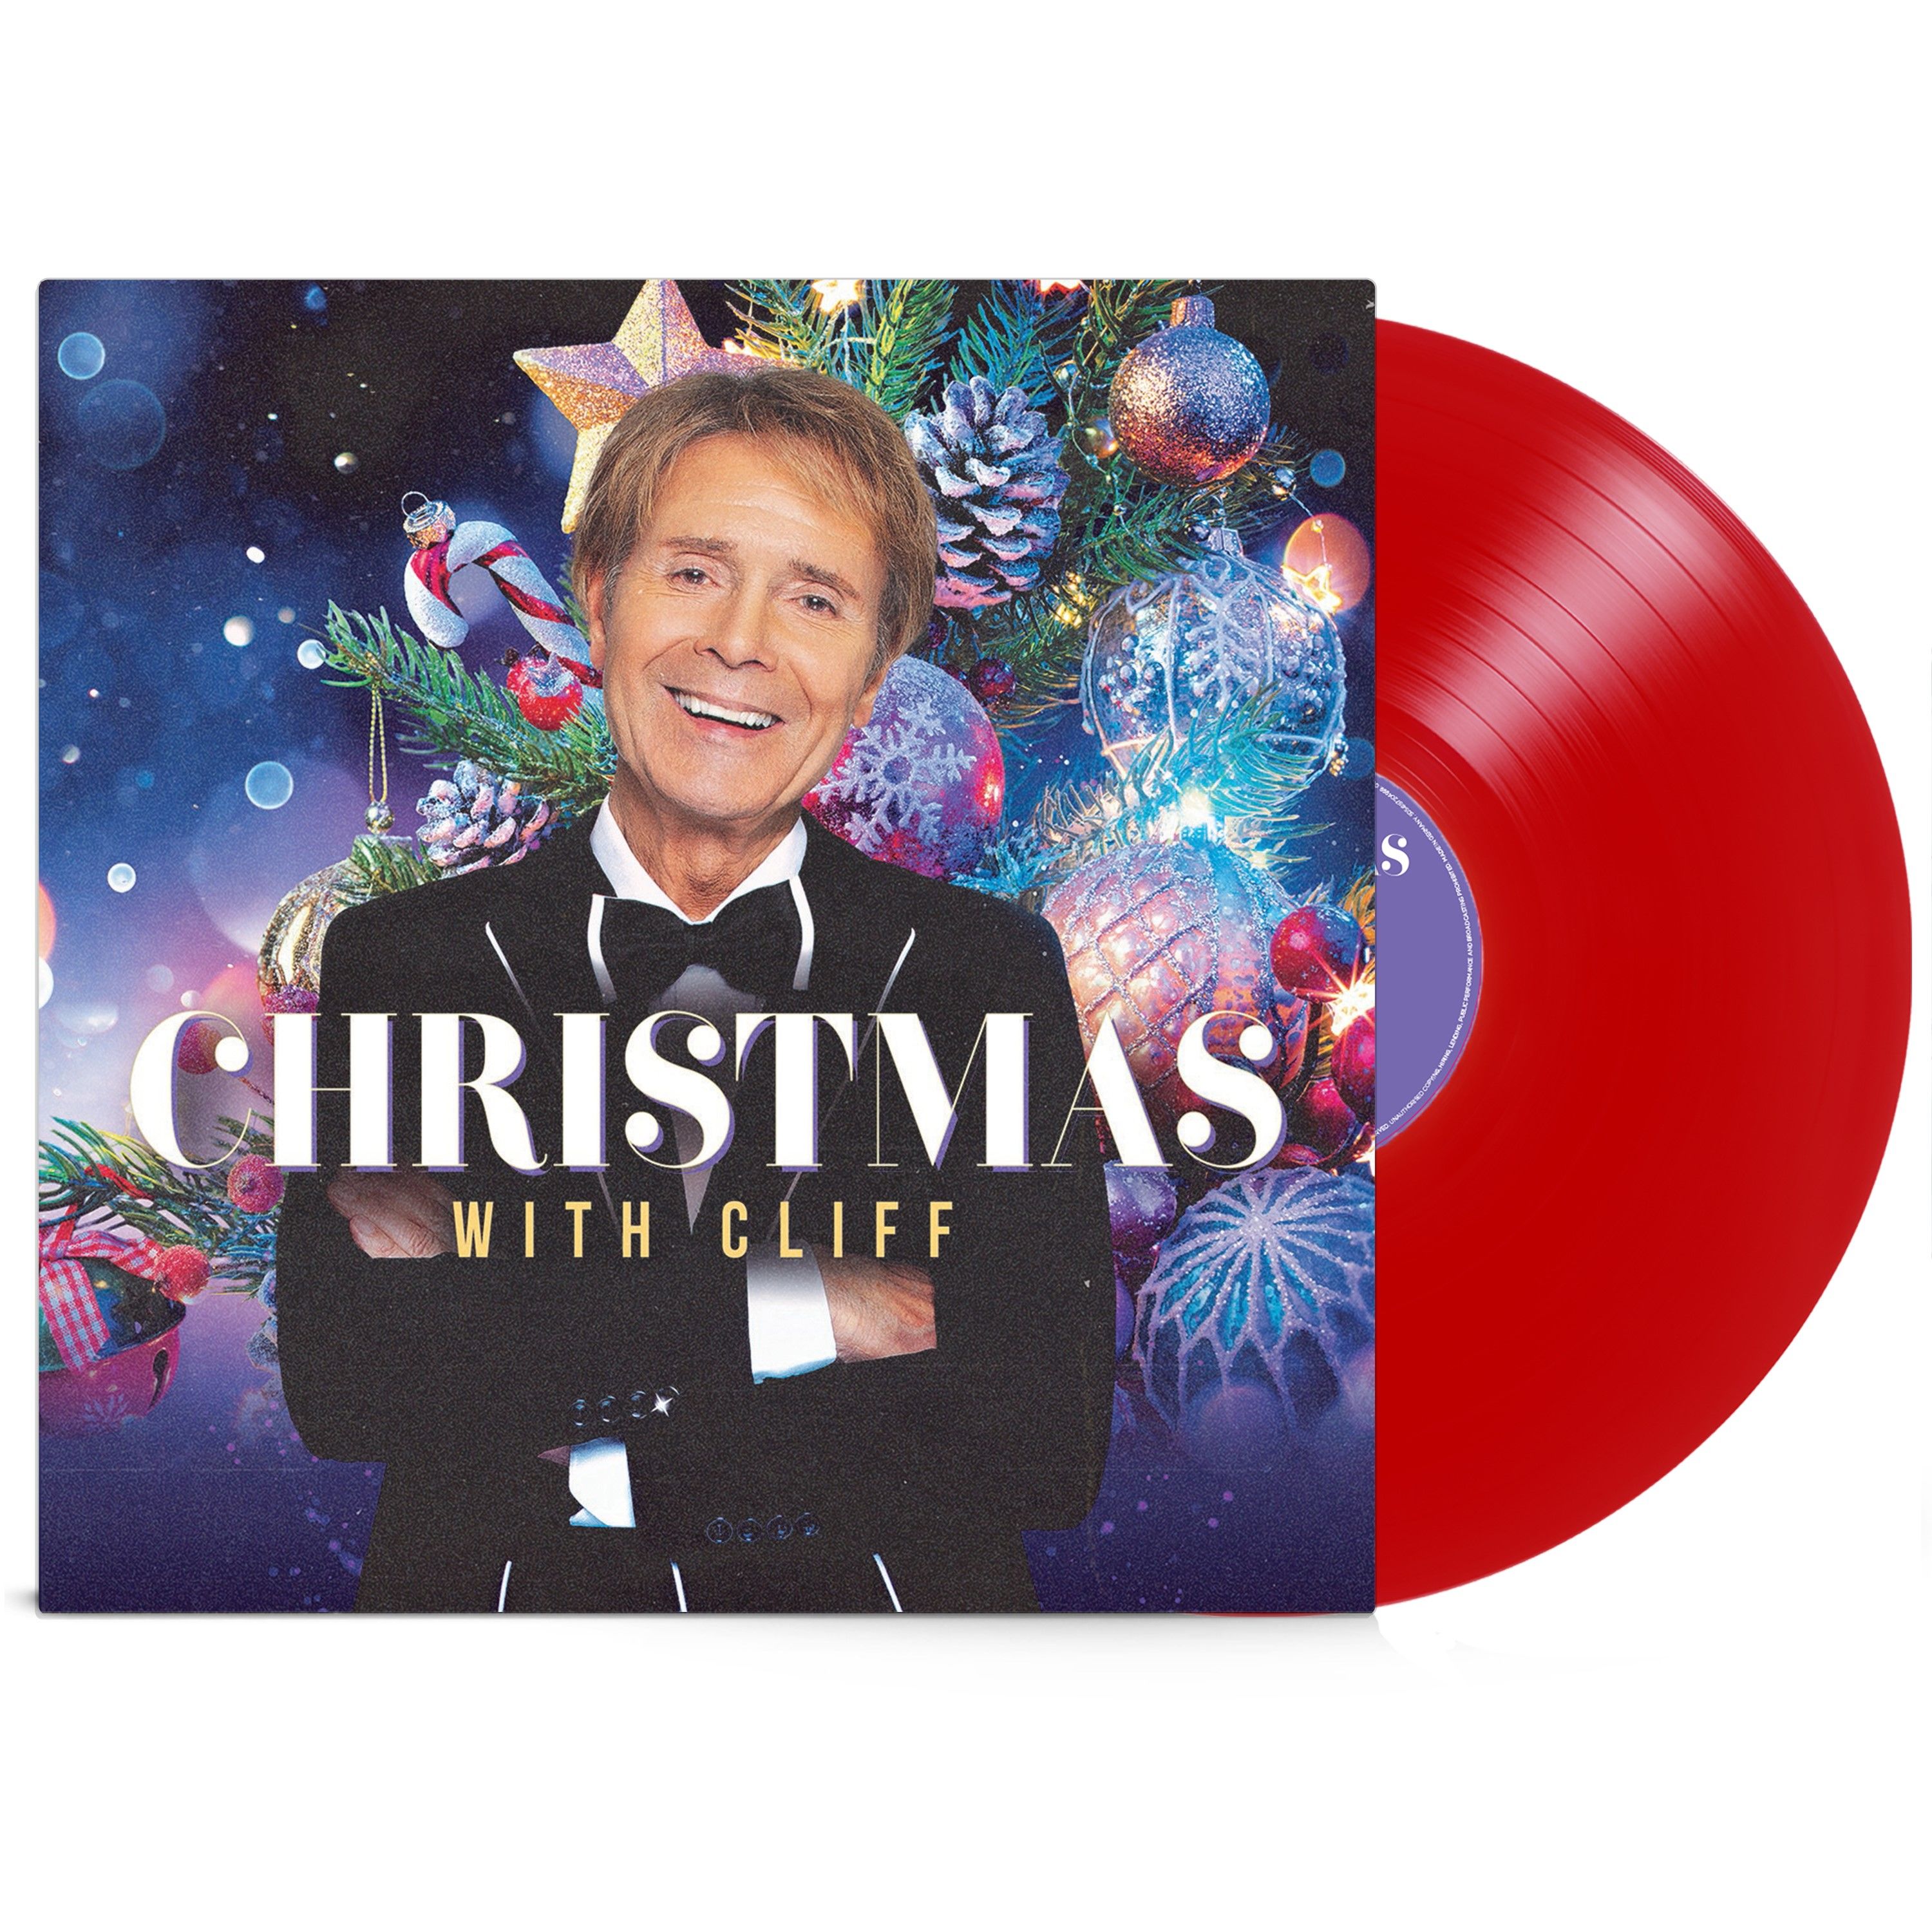 Cliff Richard - Christmas with Cliff:  Red Vinyl LP